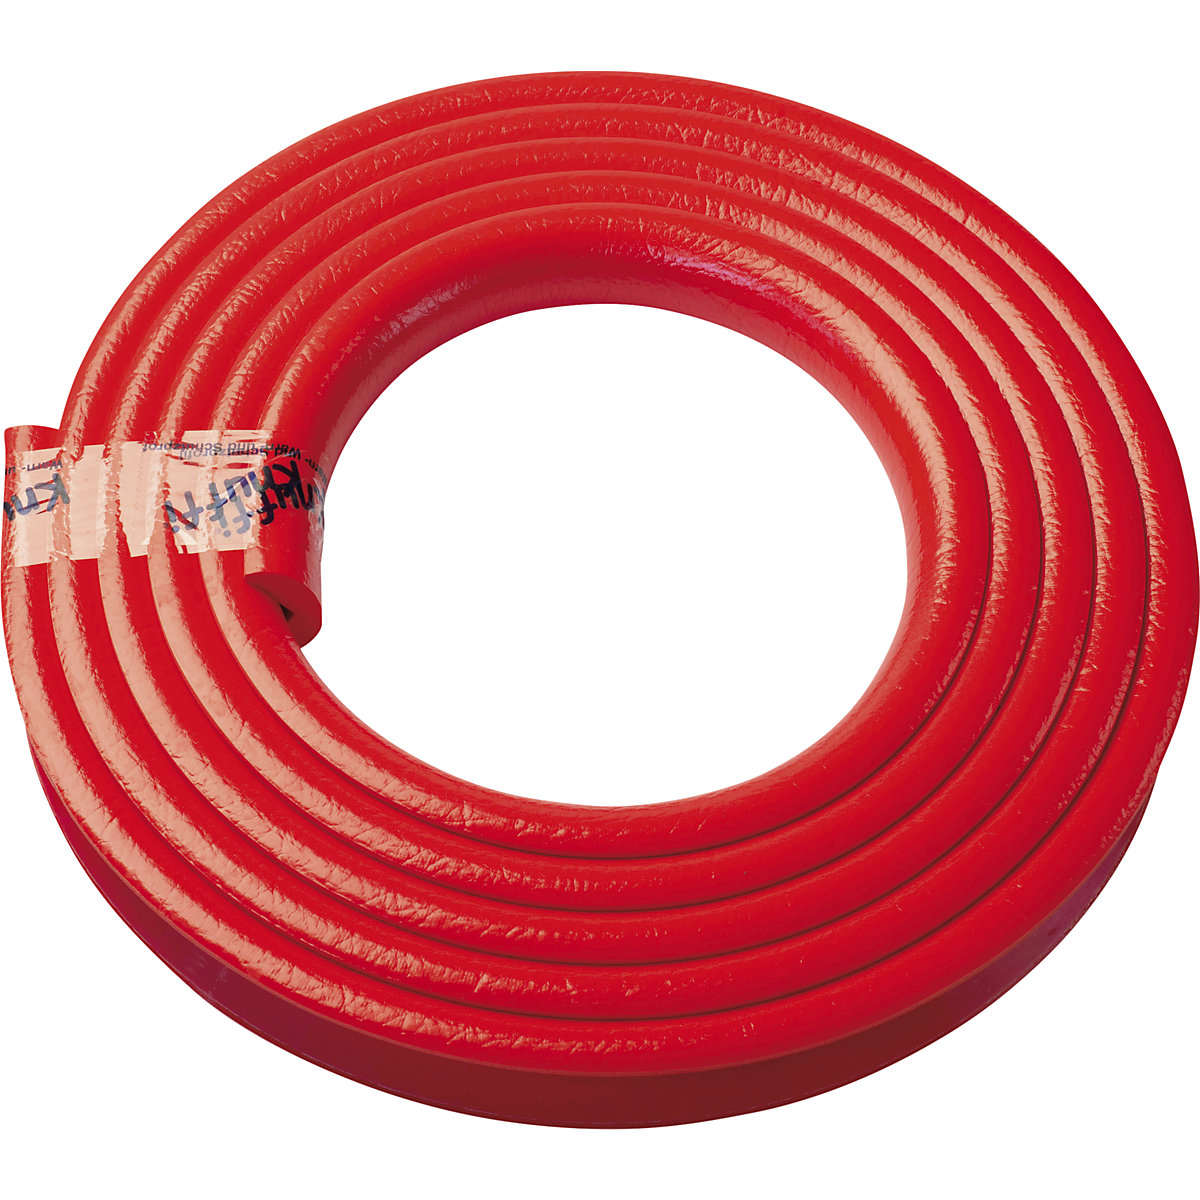 Knuffi® corner protection – SHG, type A, 1 x 5 m roll, red-28